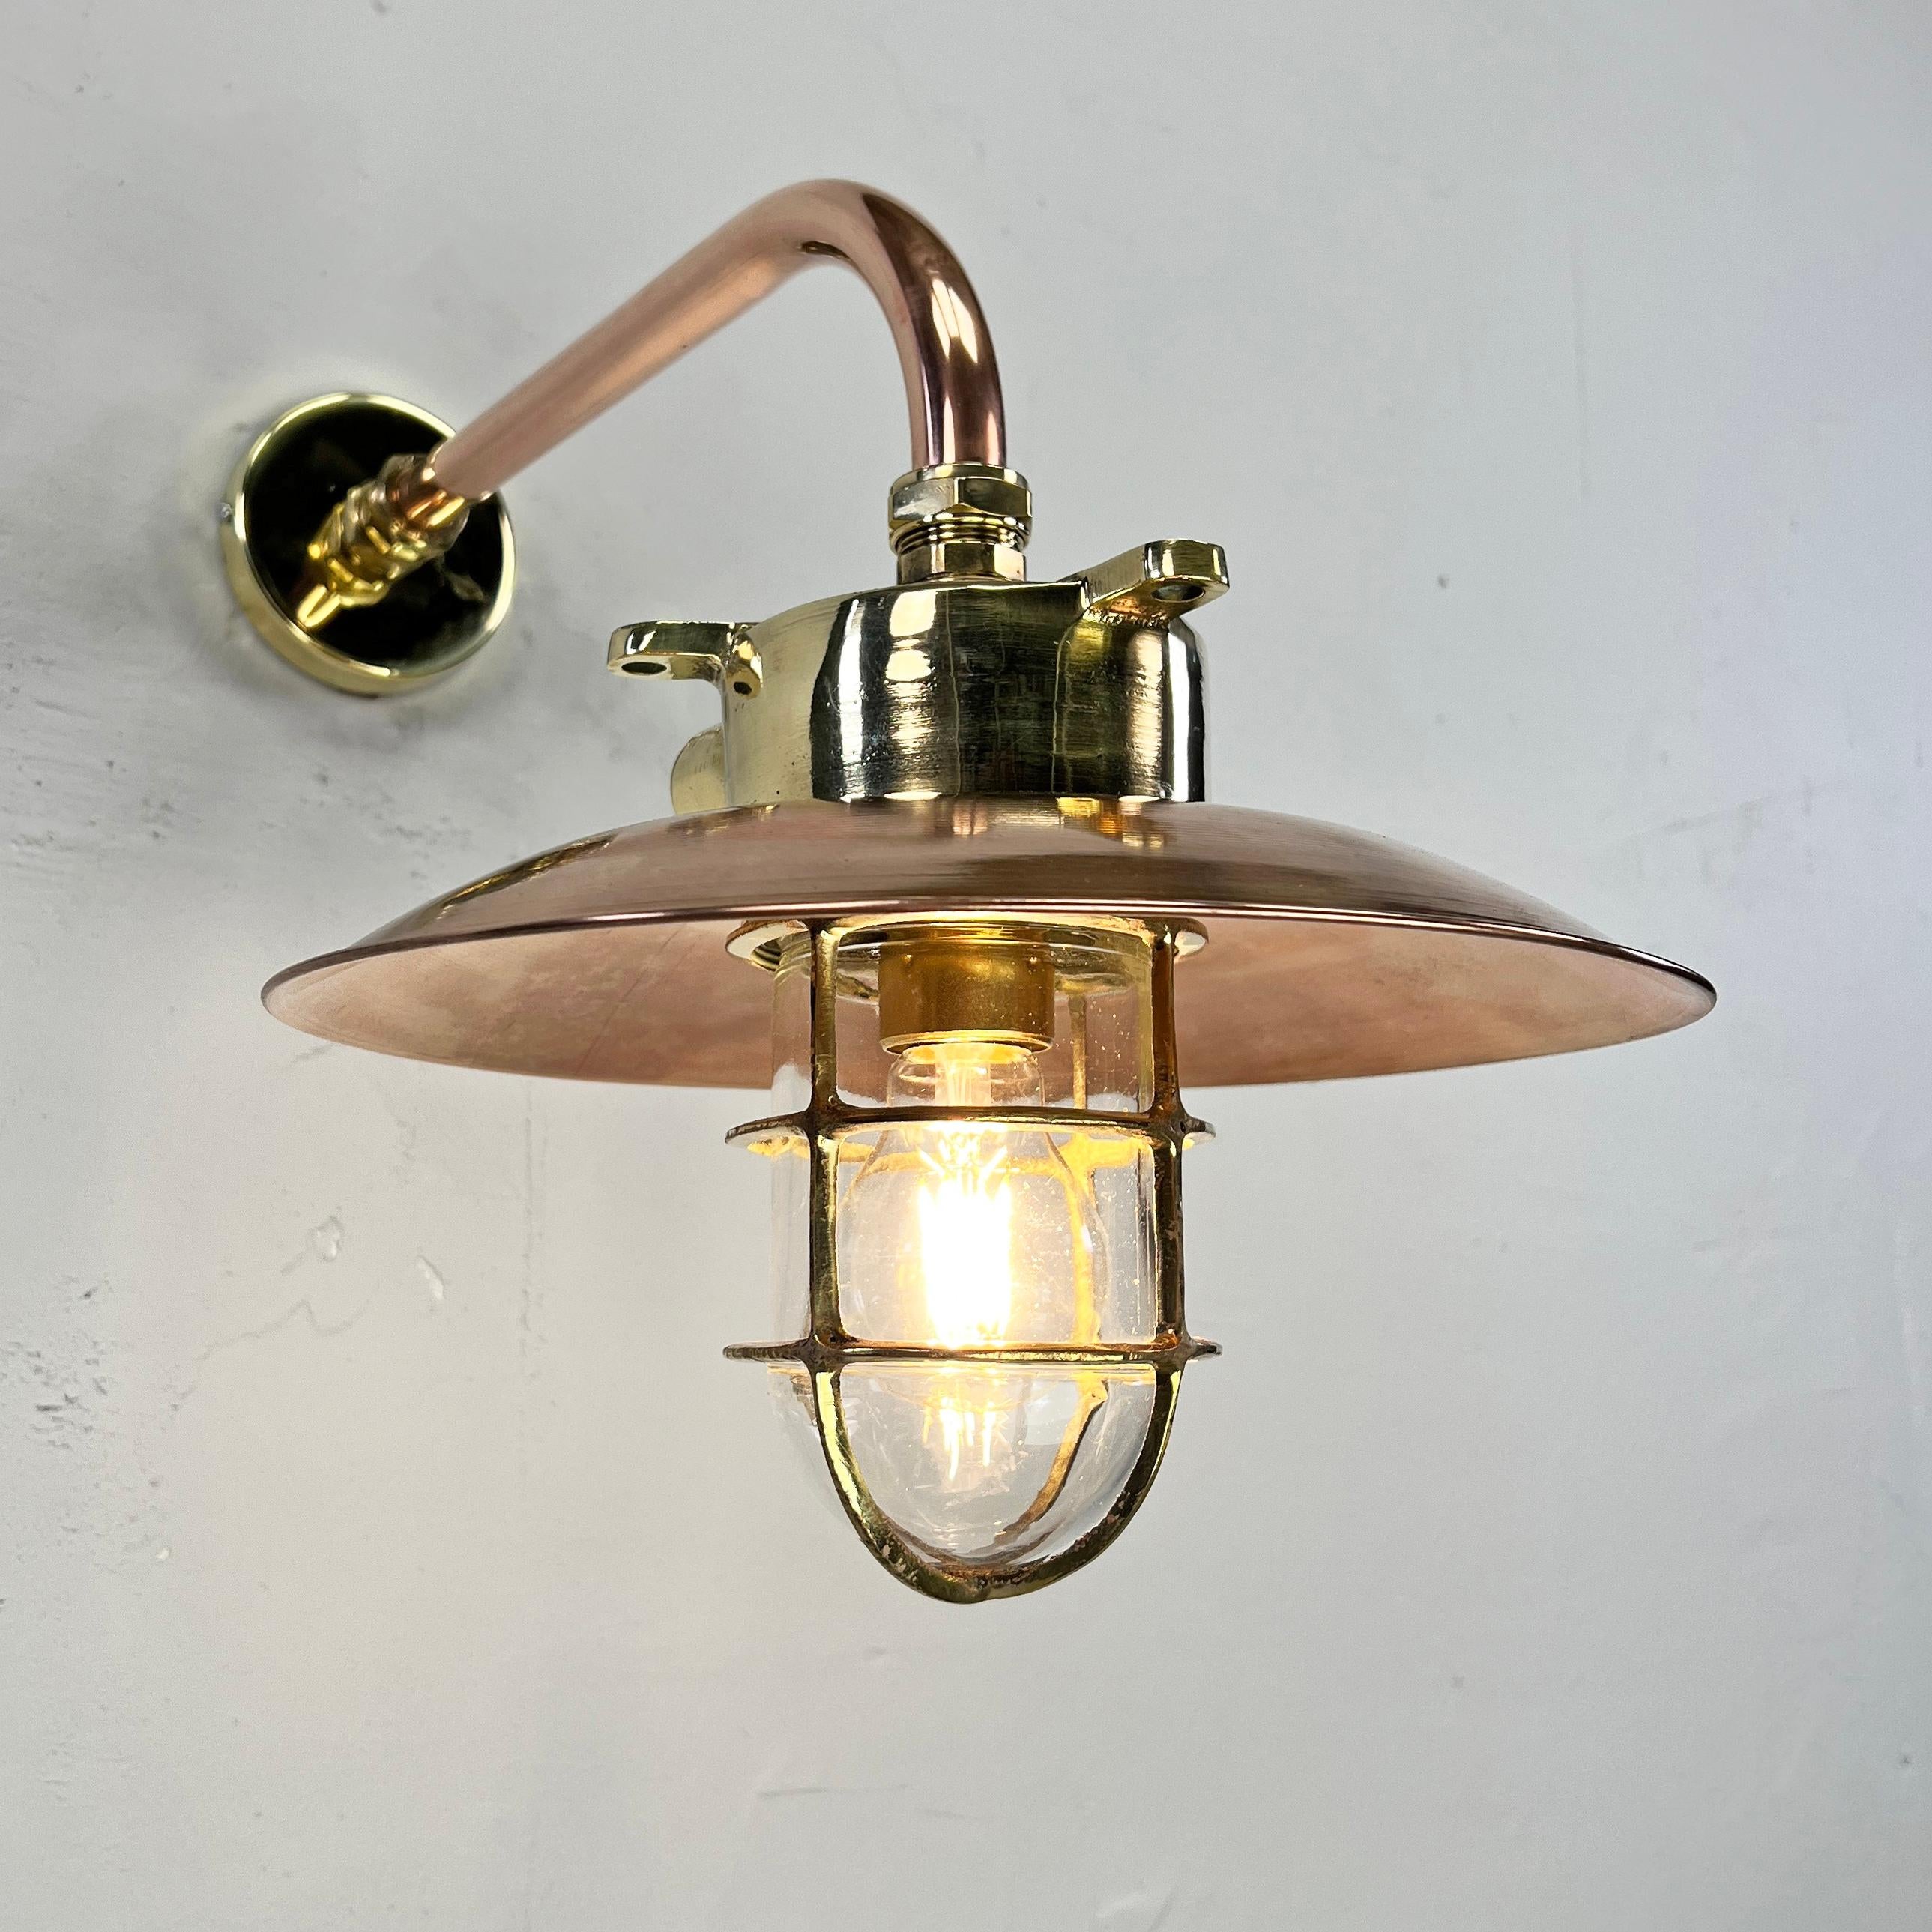 1970s Japanese Cast Brass and Copper Explosion Proof Caged Cantilever Wall Light For Sale 7